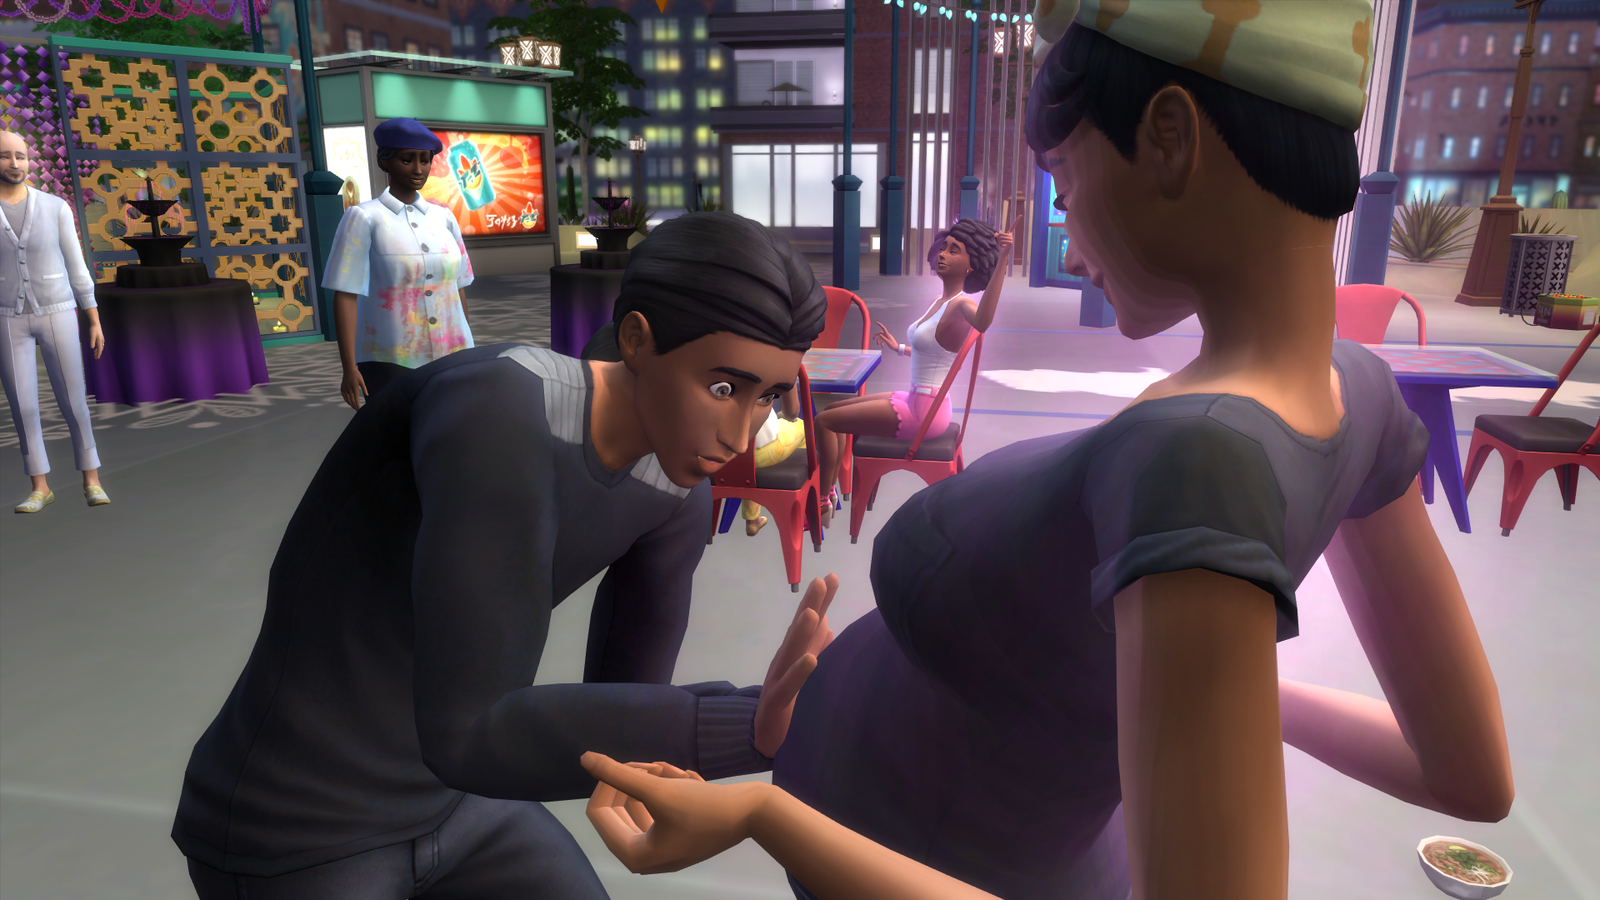 Xbox One Sims 4 Cheats, Cheat Codes, and Walkthroughs